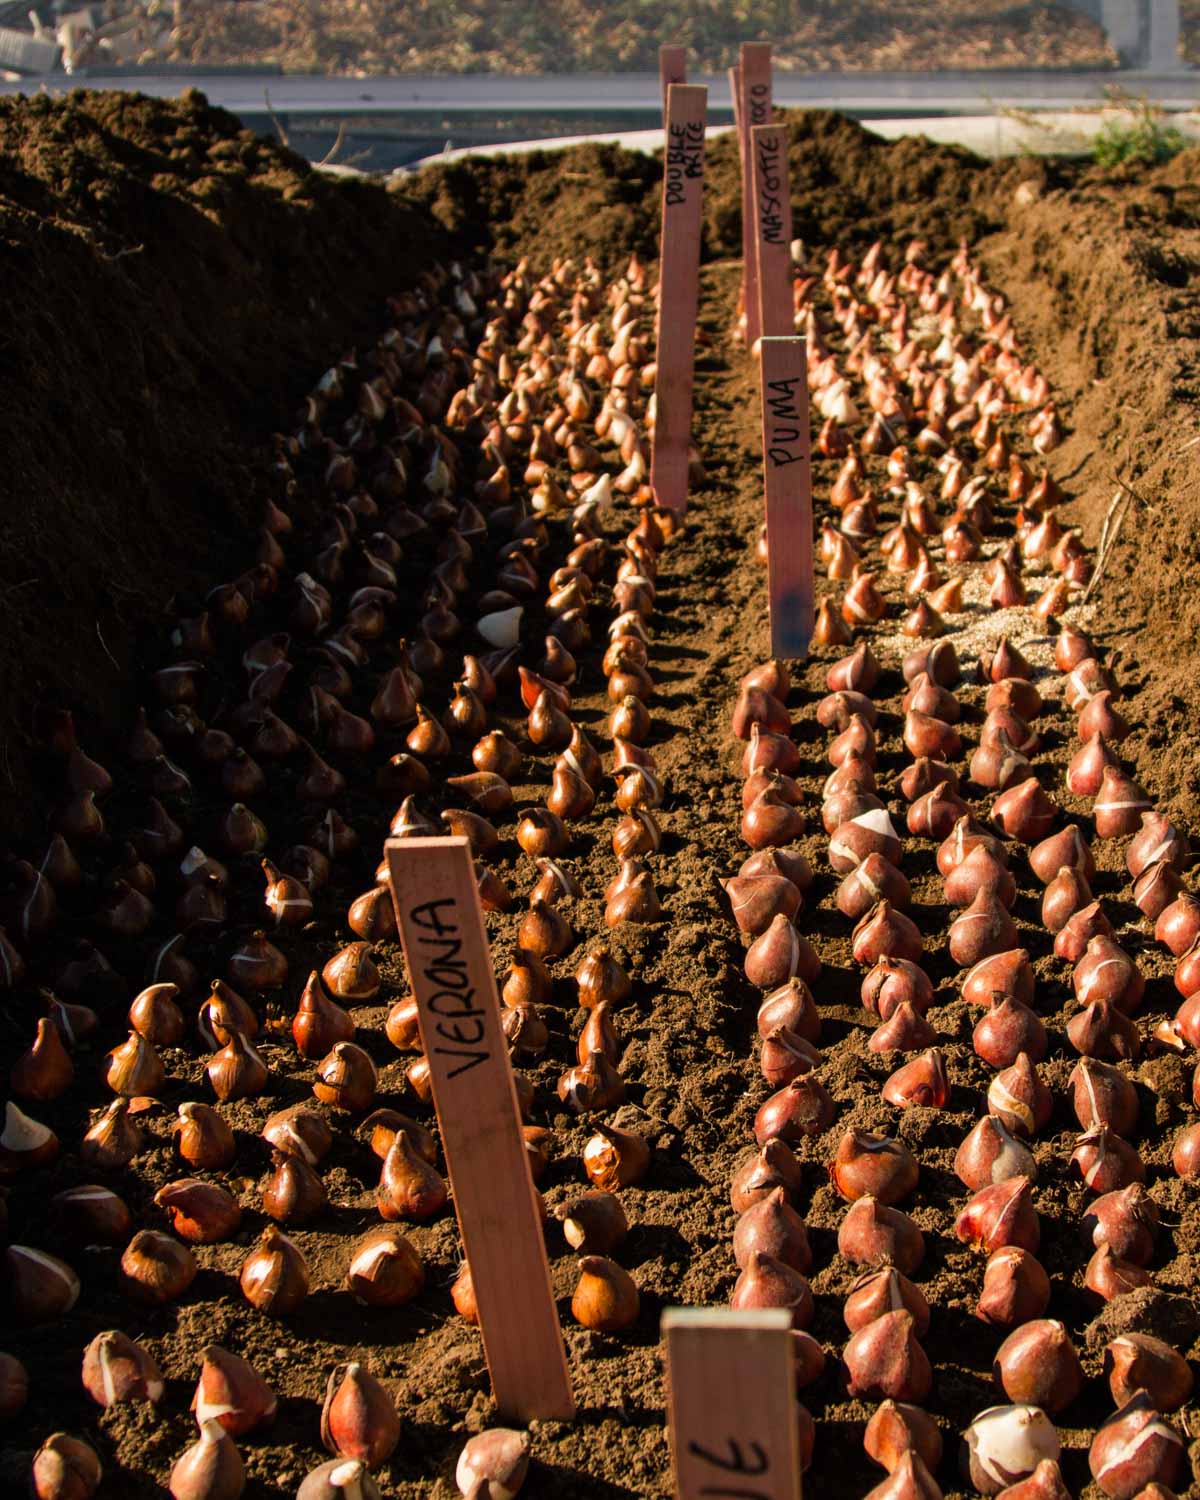 Planting Tulips in a trench